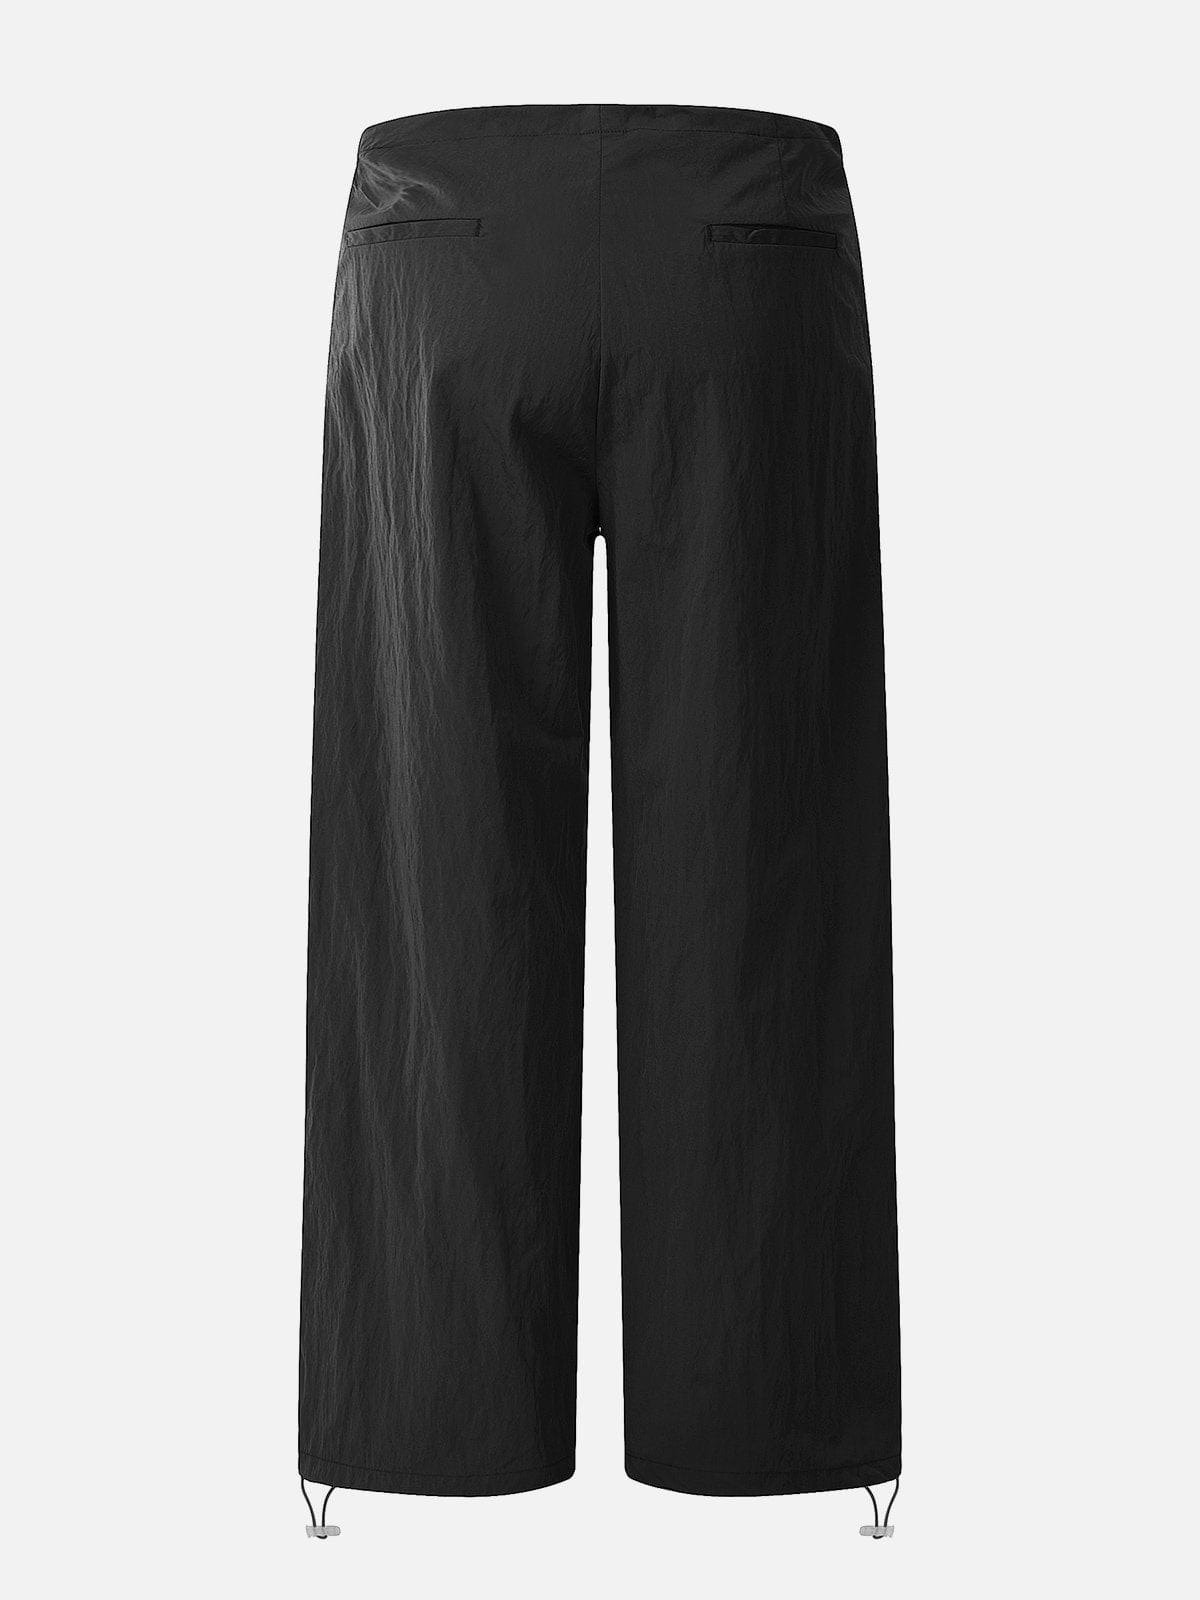 TO Button Pocket Pants